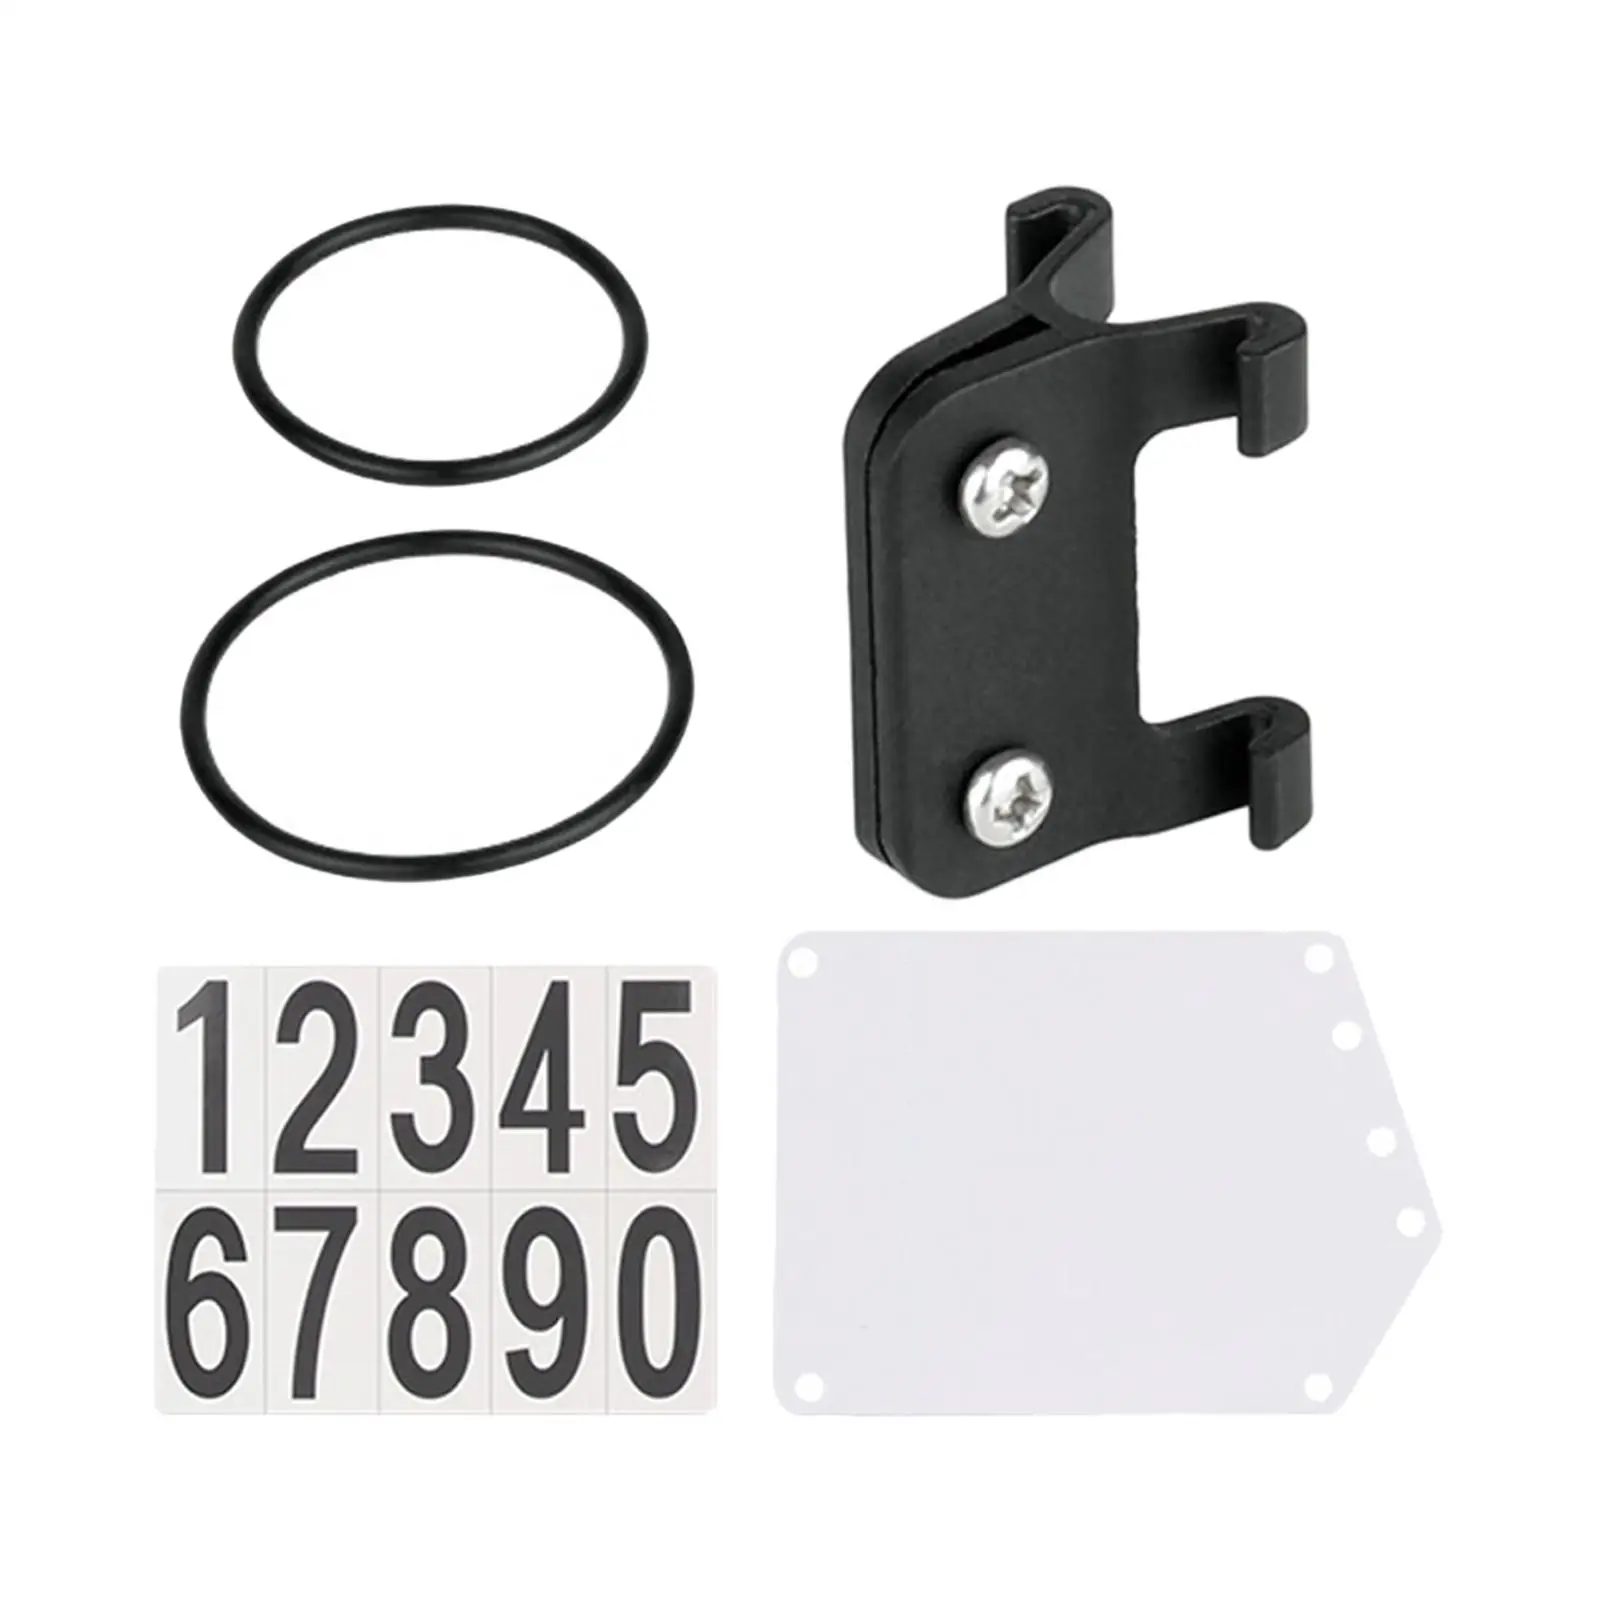 Number Plate Holder with Bands Bracket race PP for Cycling Triathlon Race Bike